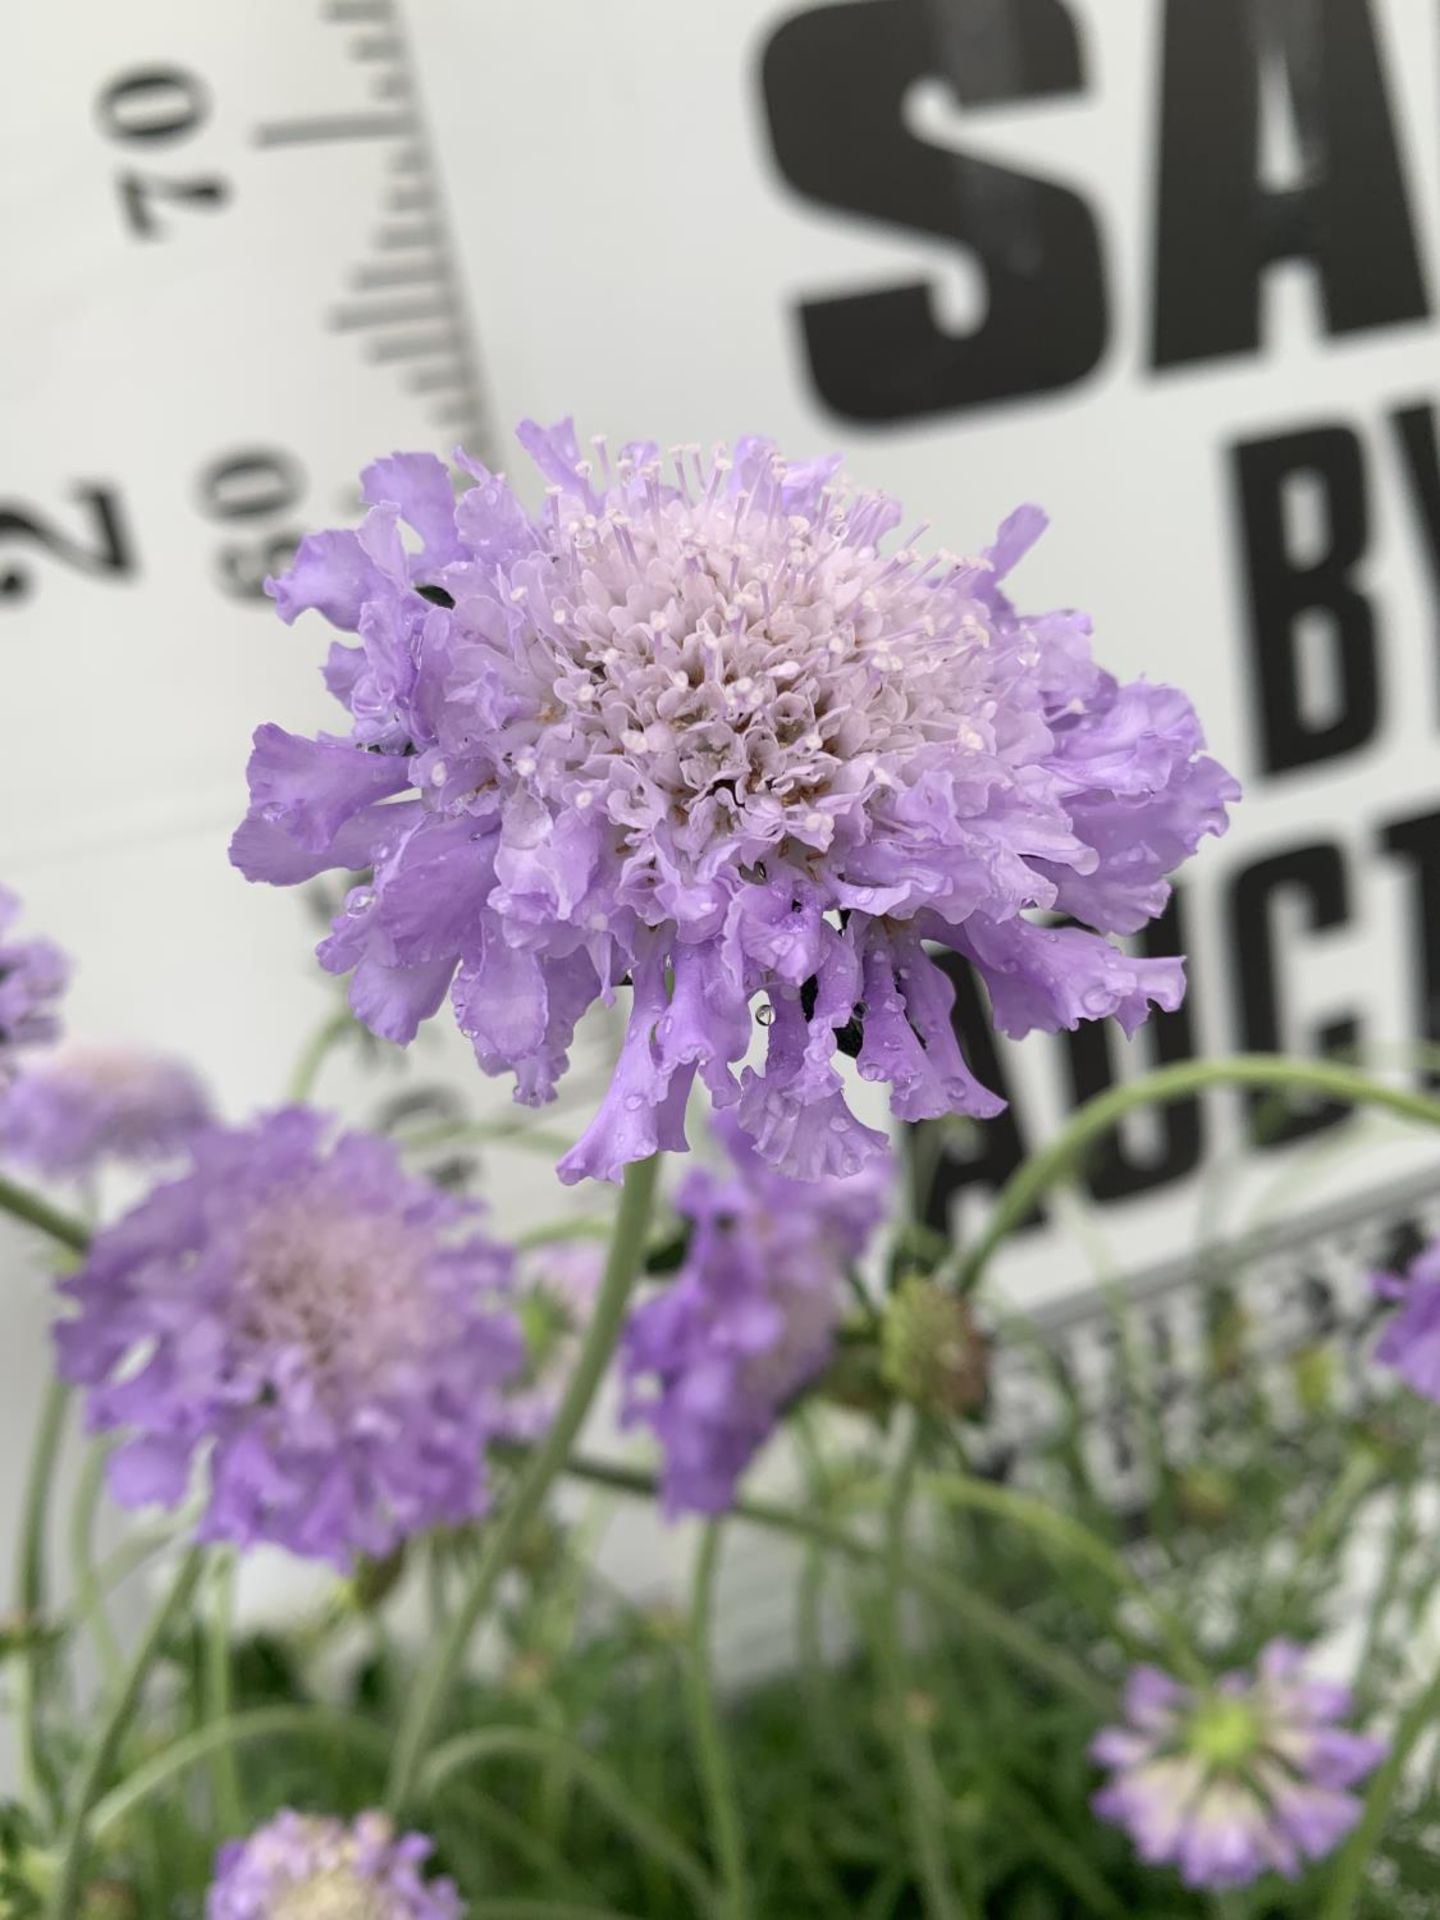 SIX SCABIOSA BUTTERFLY BLUE IN 2 LTR POTS 50-60CM TALL TO BE SOLD FOR THE SIX PLUS VAT - Image 3 of 5